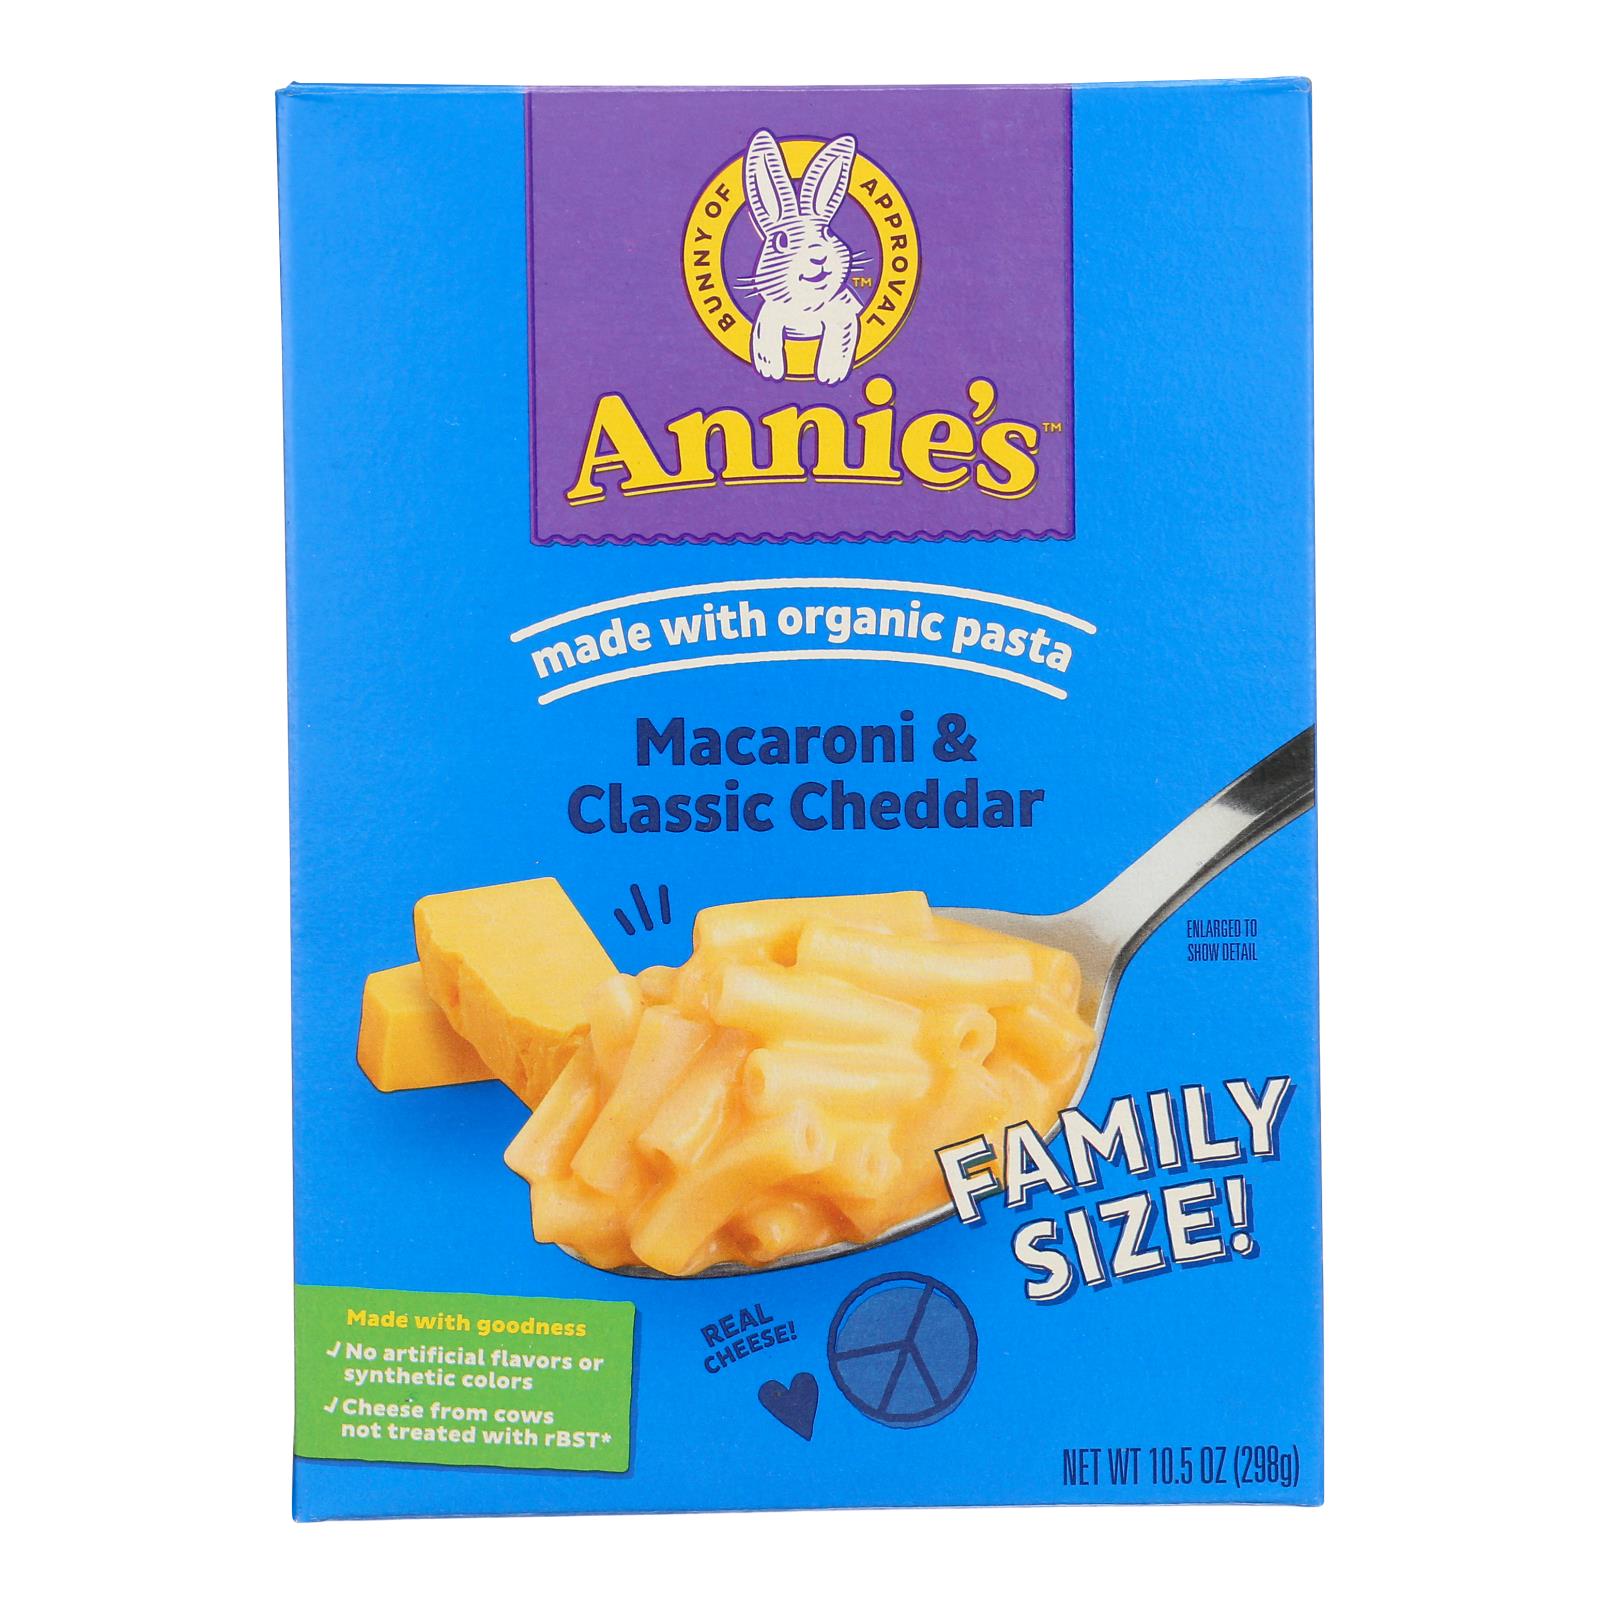 Annie's Homegrown Classic Family Size Macaroni and Cheese - Case of 6 - 10.5 oz.